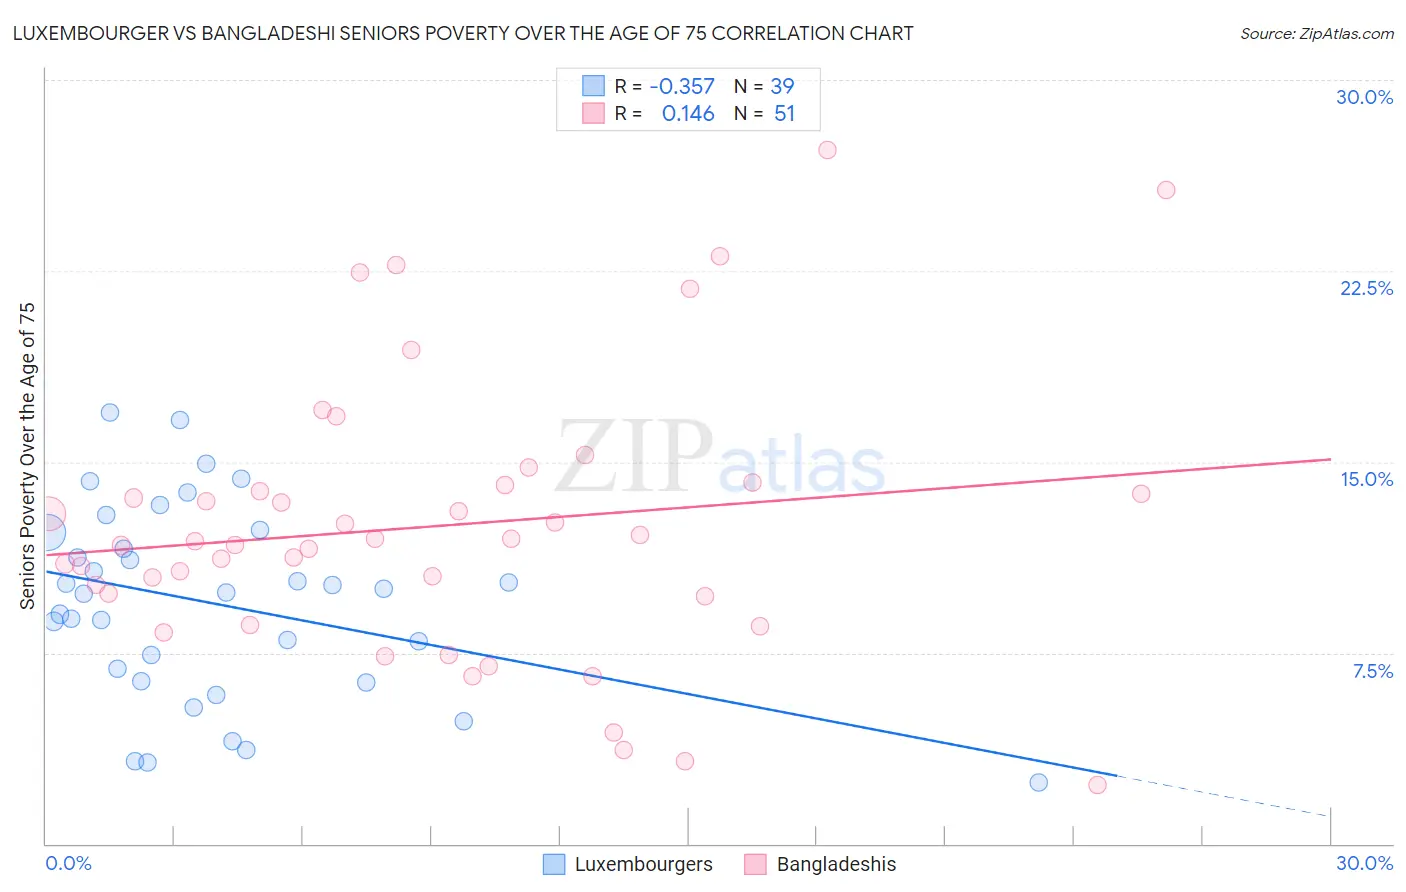 Luxembourger vs Bangladeshi Seniors Poverty Over the Age of 75